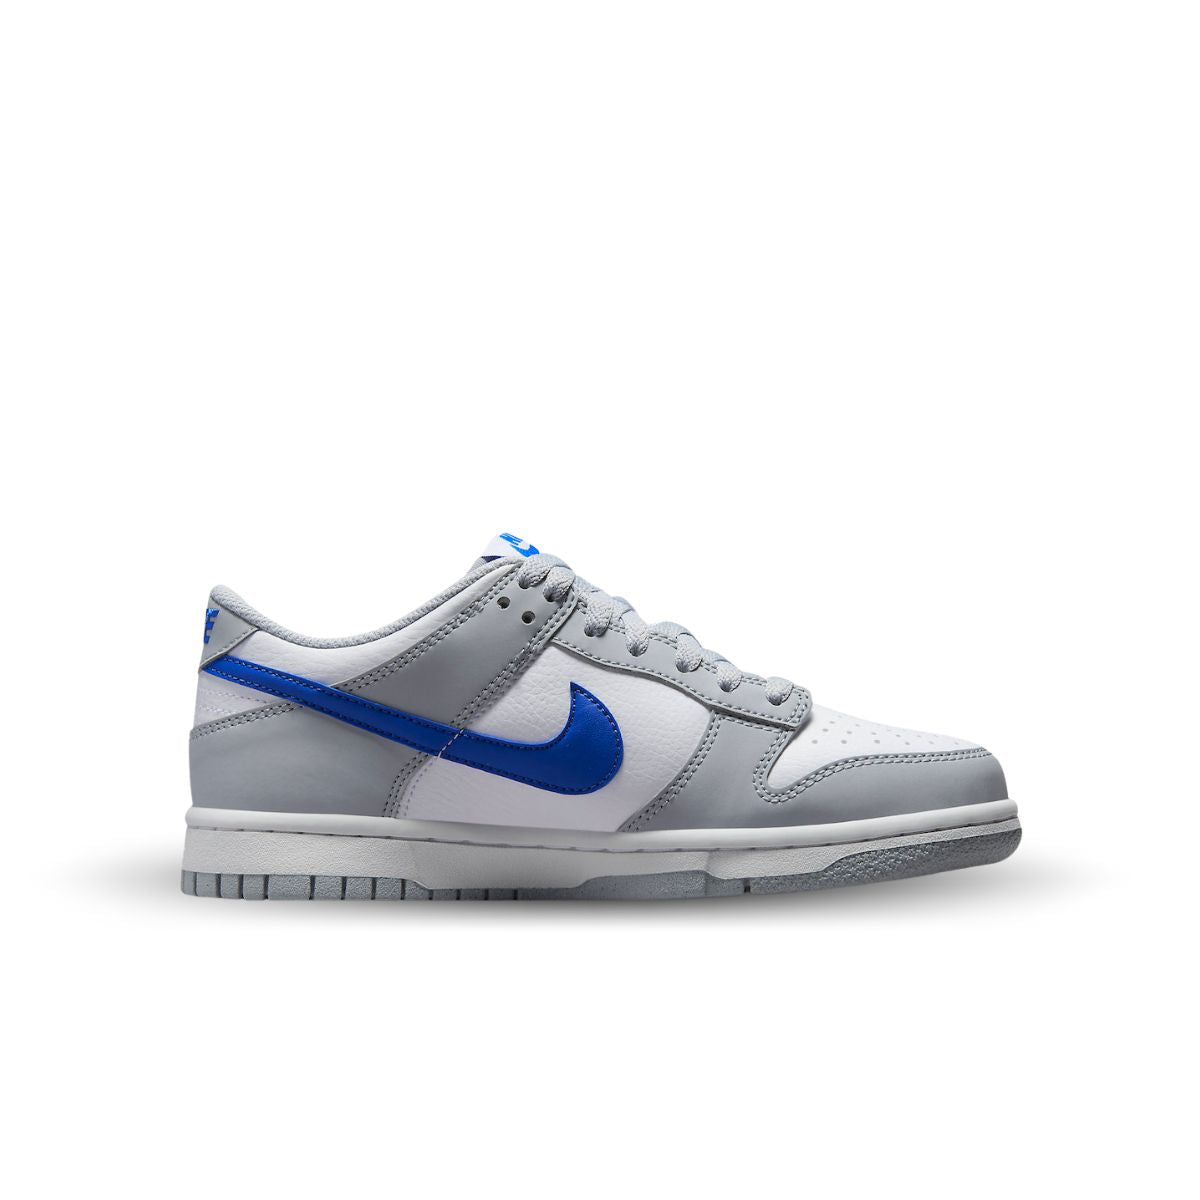 Nike, Dunks, Grey Shoelace, Replacements